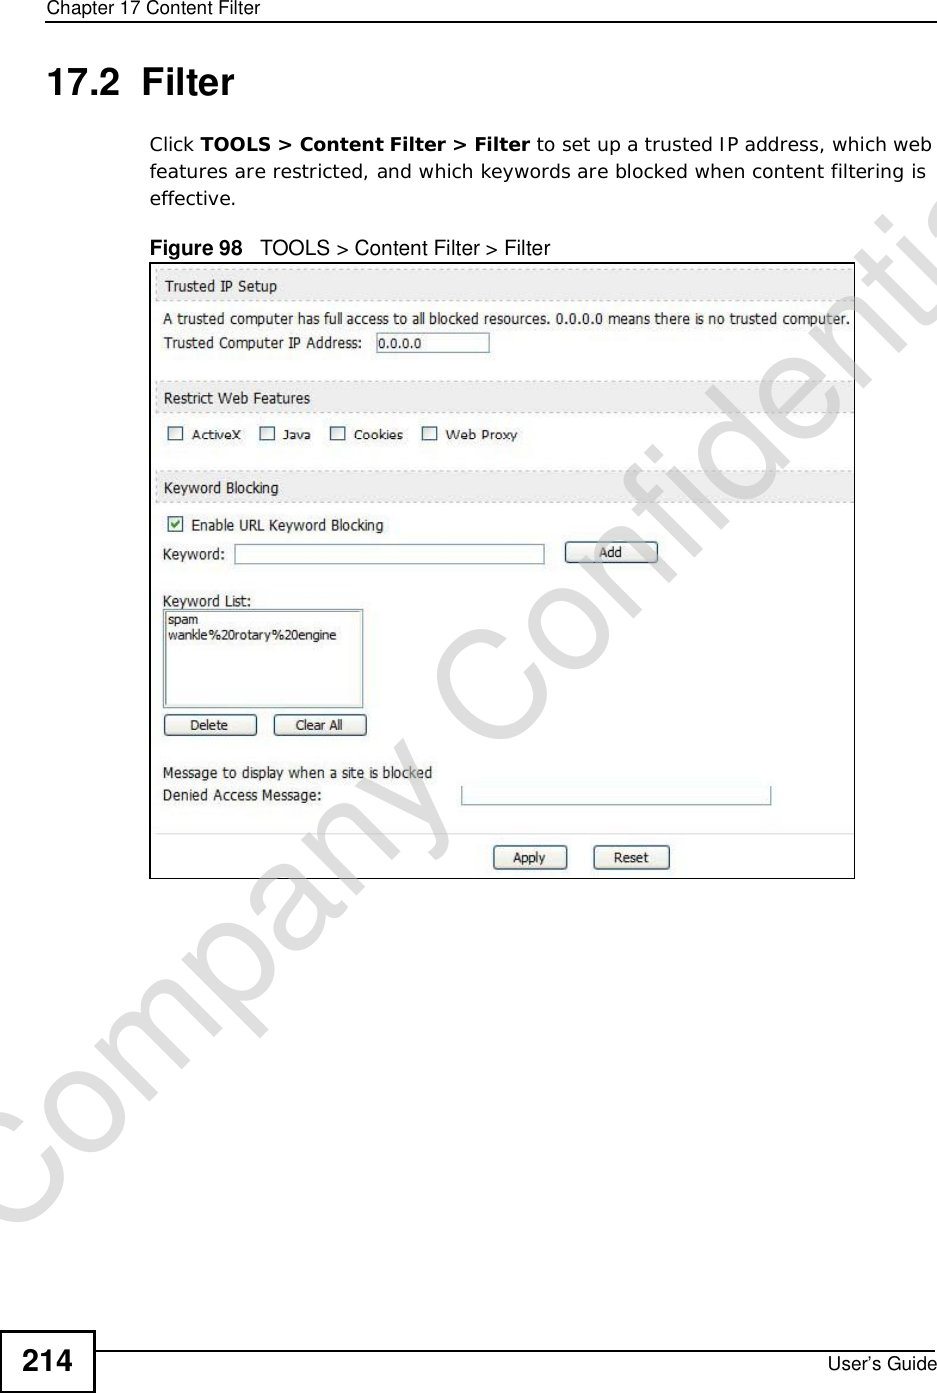 Chapter 17Content FilterUser’s Guide21417.2  FilterClick TOOLS &gt; Content Filter &gt; Filter to set up a trusted IP address, which web features are restricted, and which keywords are blocked when content filtering is effective.Figure 98   TOOLS &gt; Content Filter &gt; FilterCompany Confidential